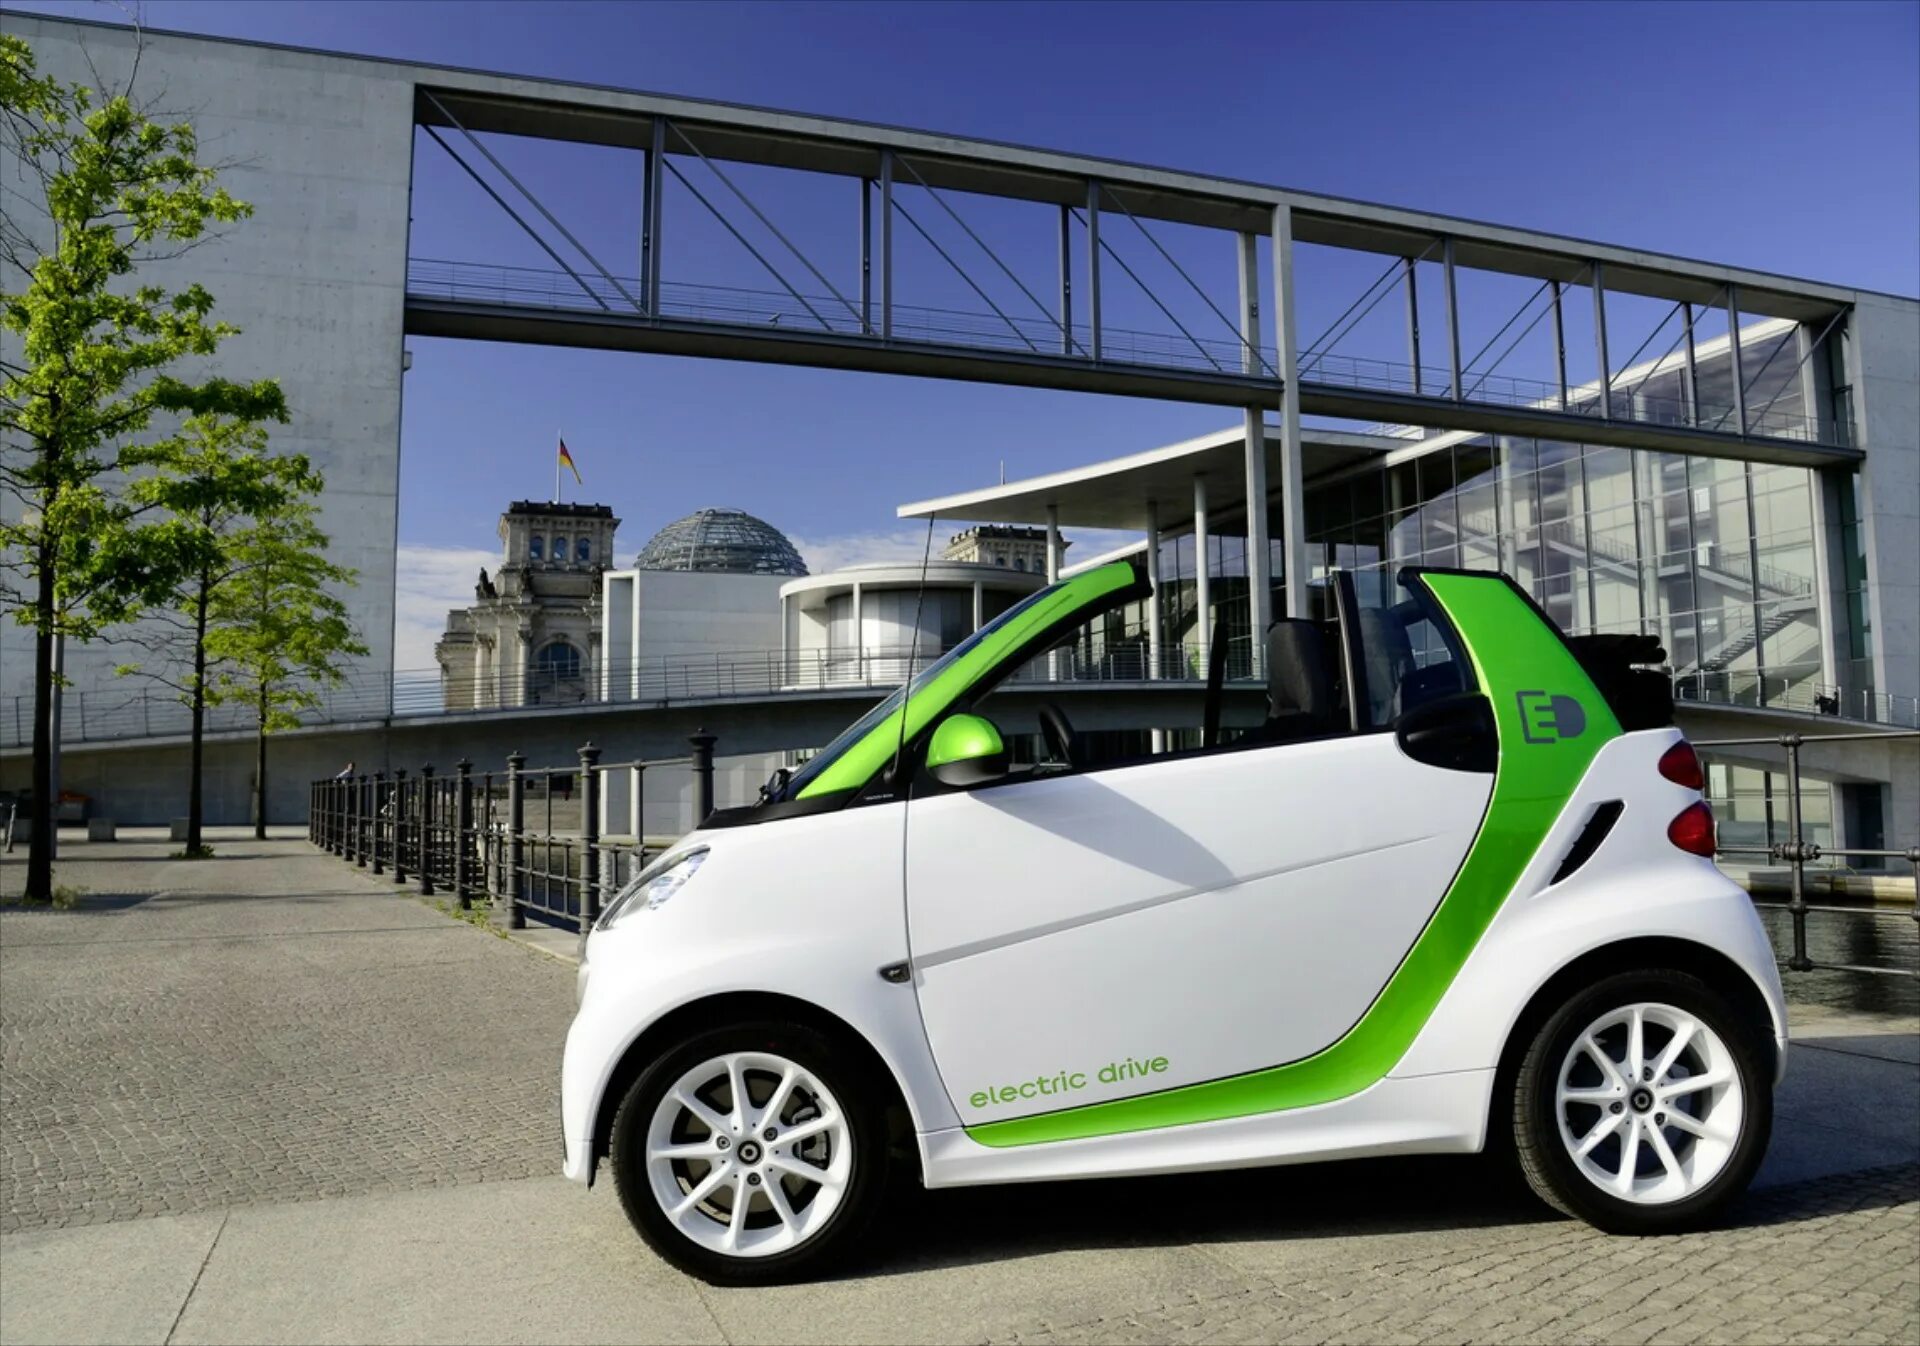 Электрокар смарт. Smart Fortwo электро. Smart Fortwo Cabrio Electric. Smart Fortwo Electric Drive.